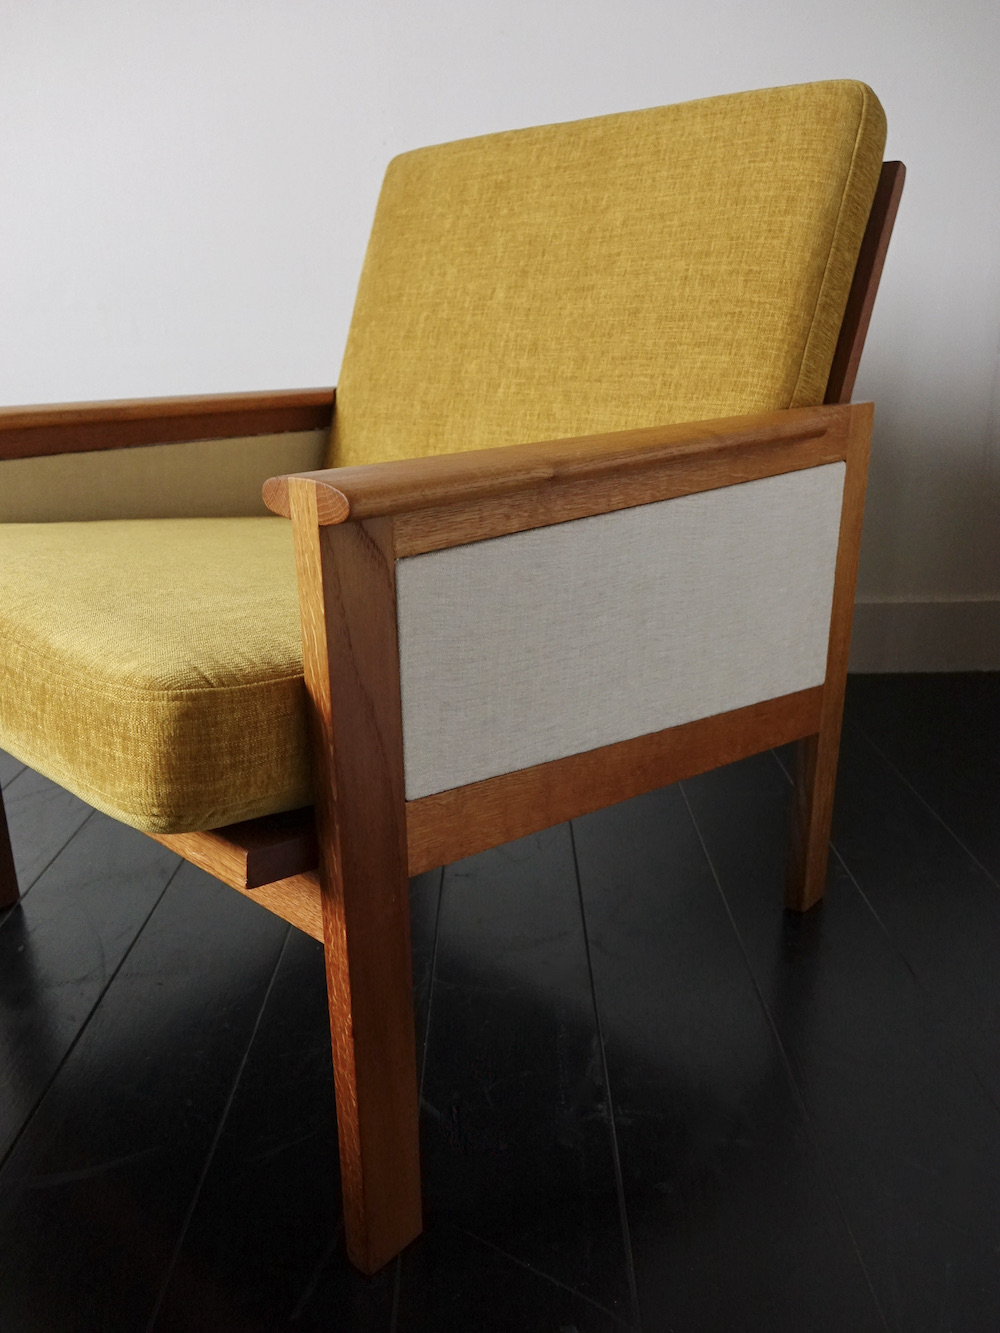 Capella chair with ottoman “model.4″ by Illum Wikkelso for Niels Erik Eilersen